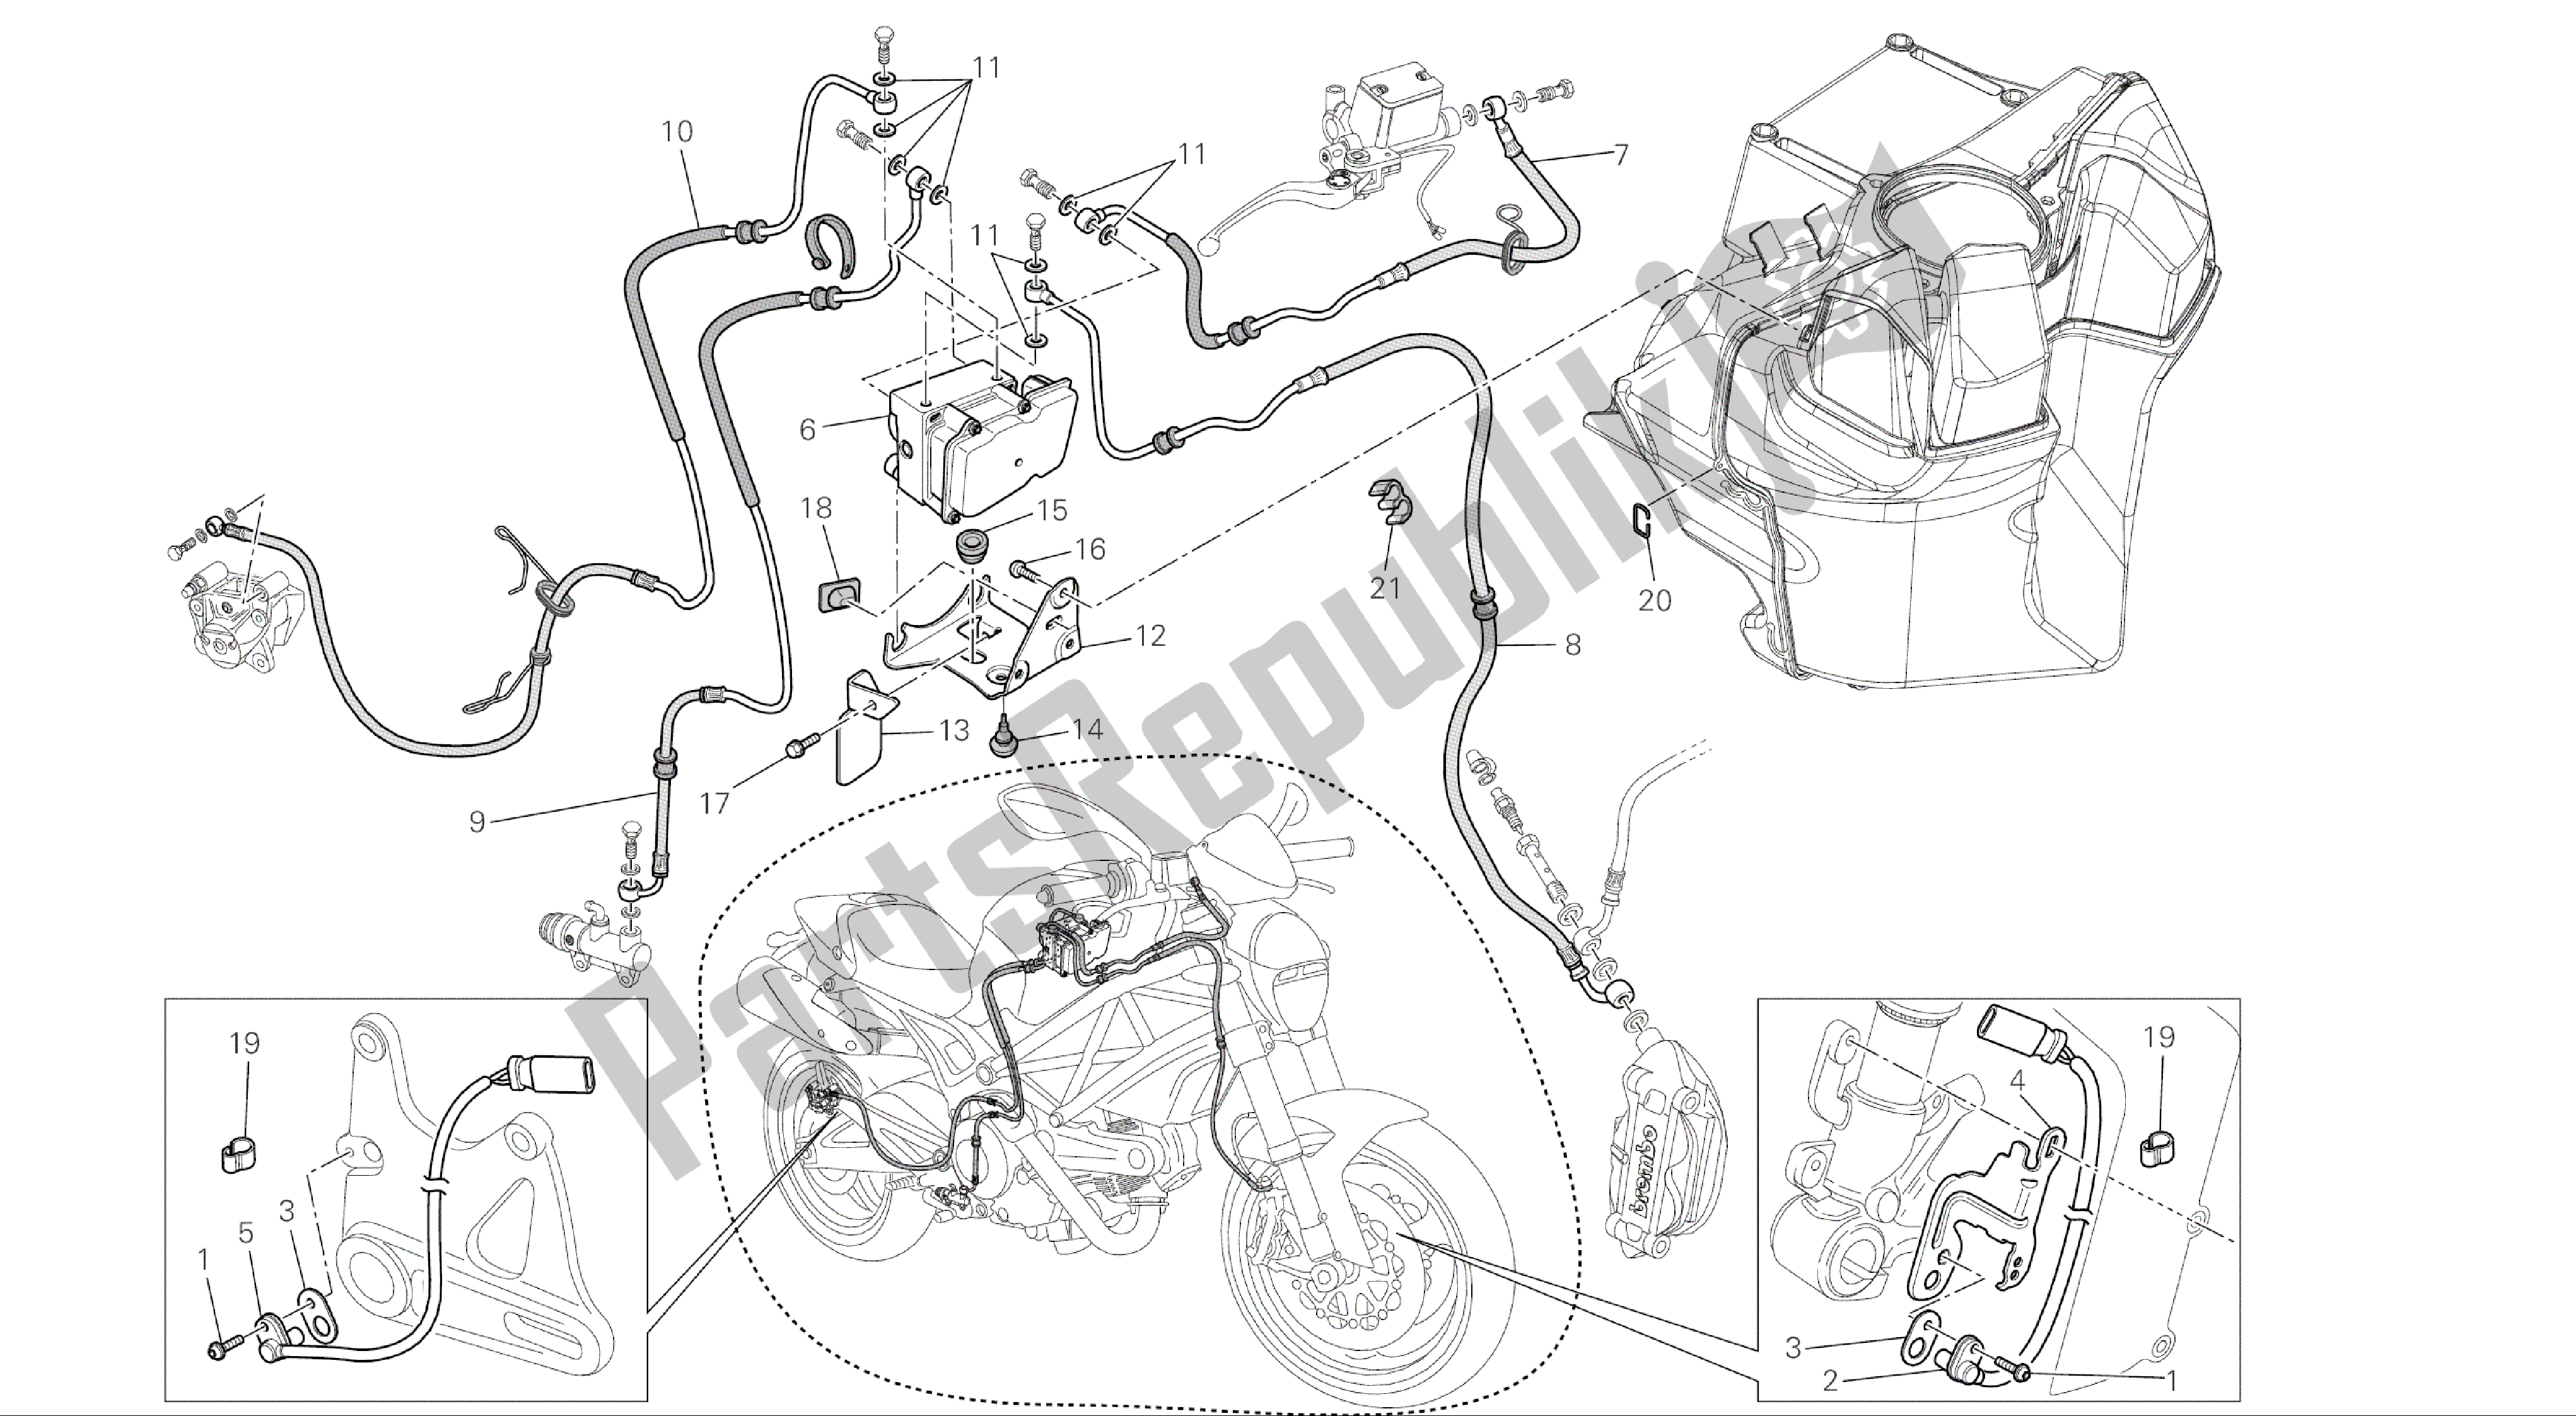 All parts for the Drawing 28a - Braking System Abs [mod:m696 Abs,m696+abs;xst:aus,eur,jap]group Frame of the Ducati Monster ABS 696 2014